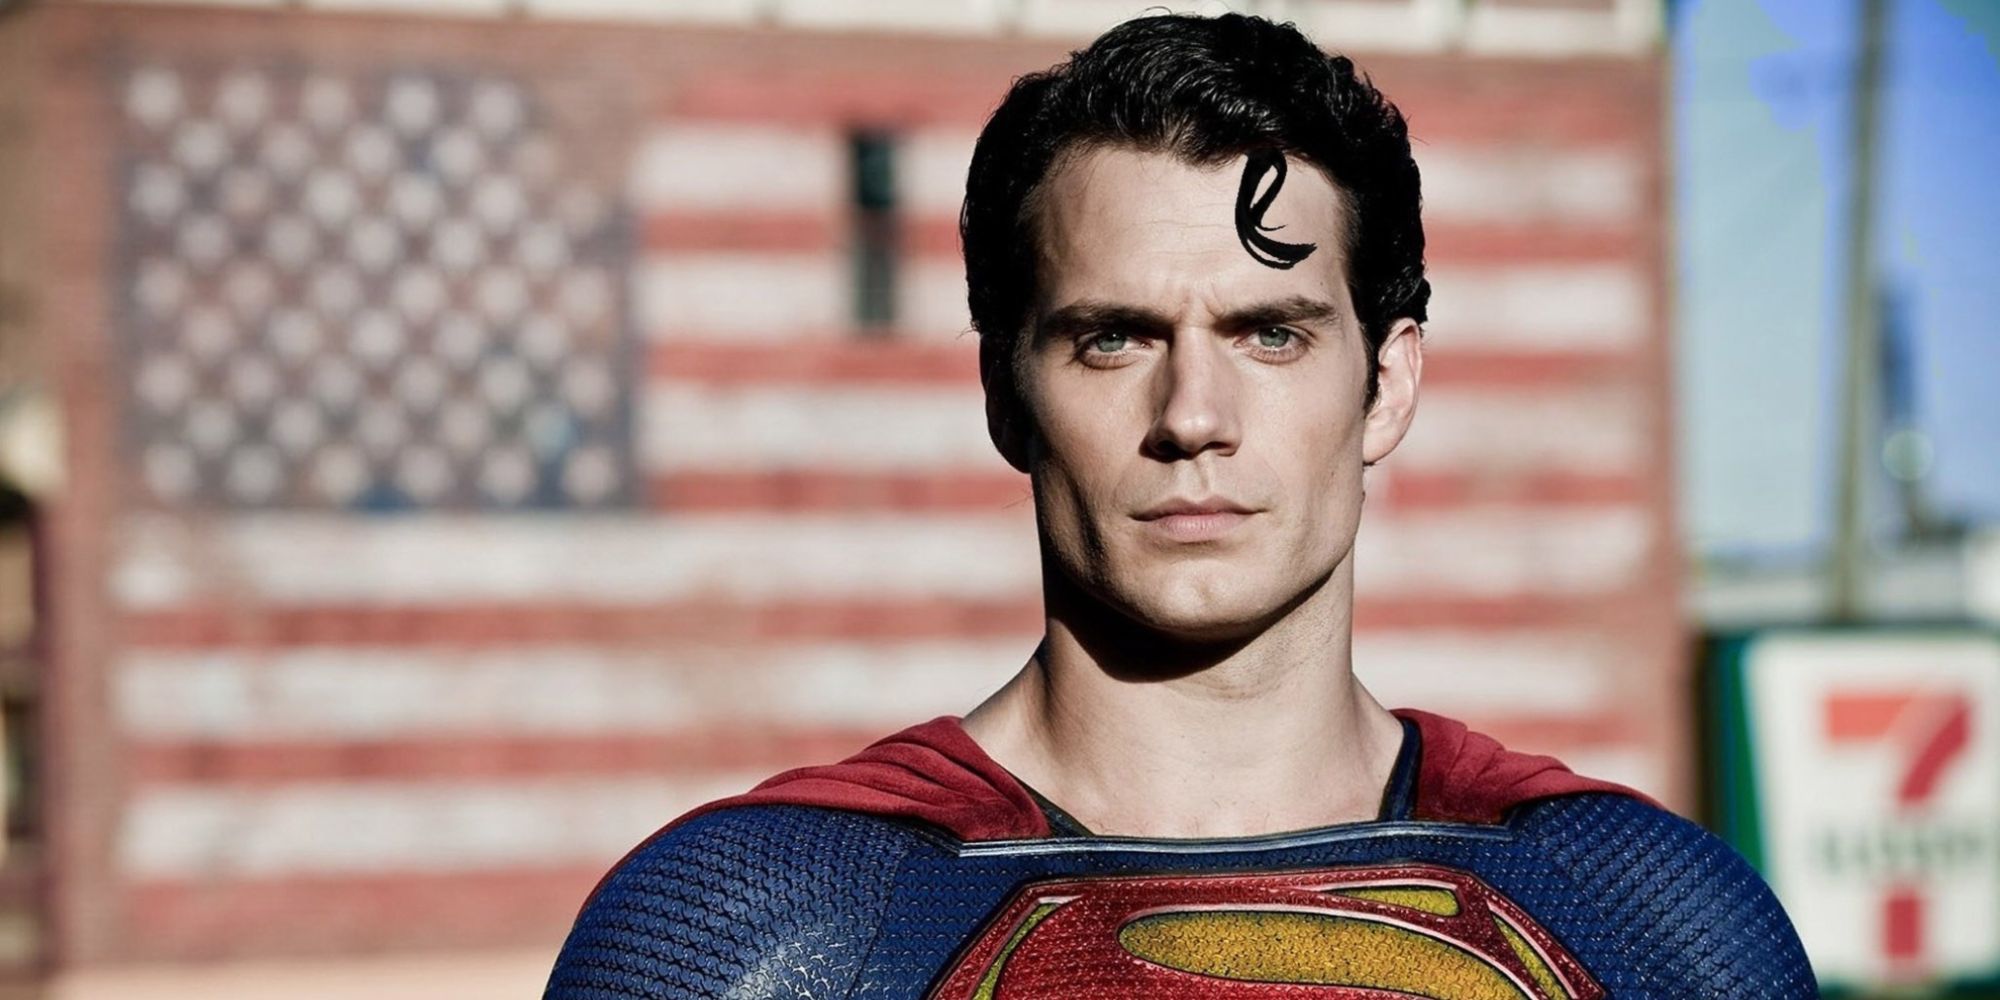 Actor Henry Cavill as Superman in the Warner Bros. DCEU Superman movies